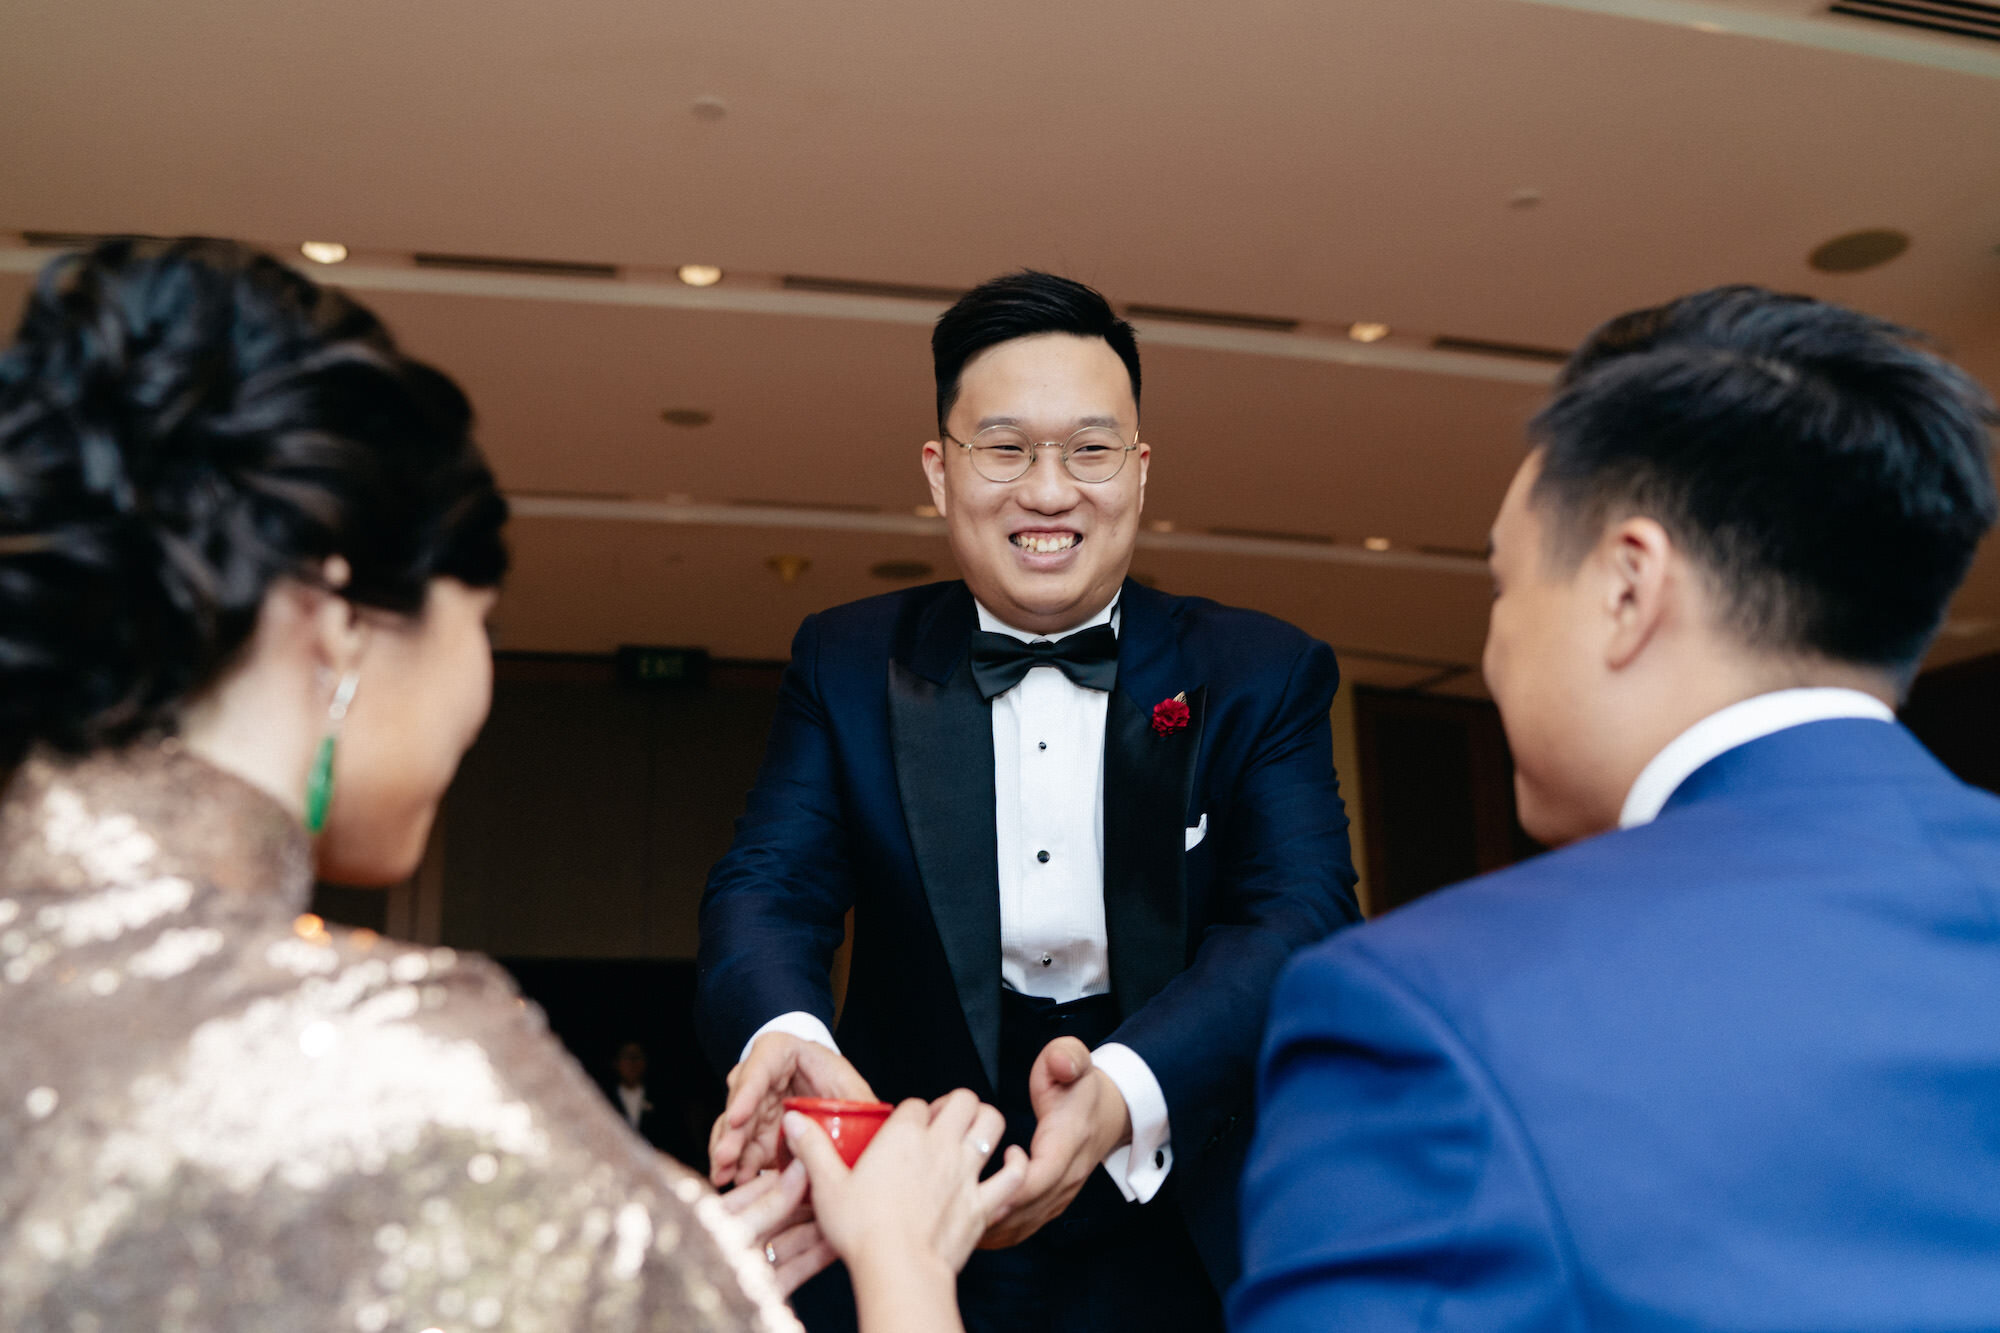 20191026_Lyn and Ming Xian_Capella Singapore (93 of 398).JPG